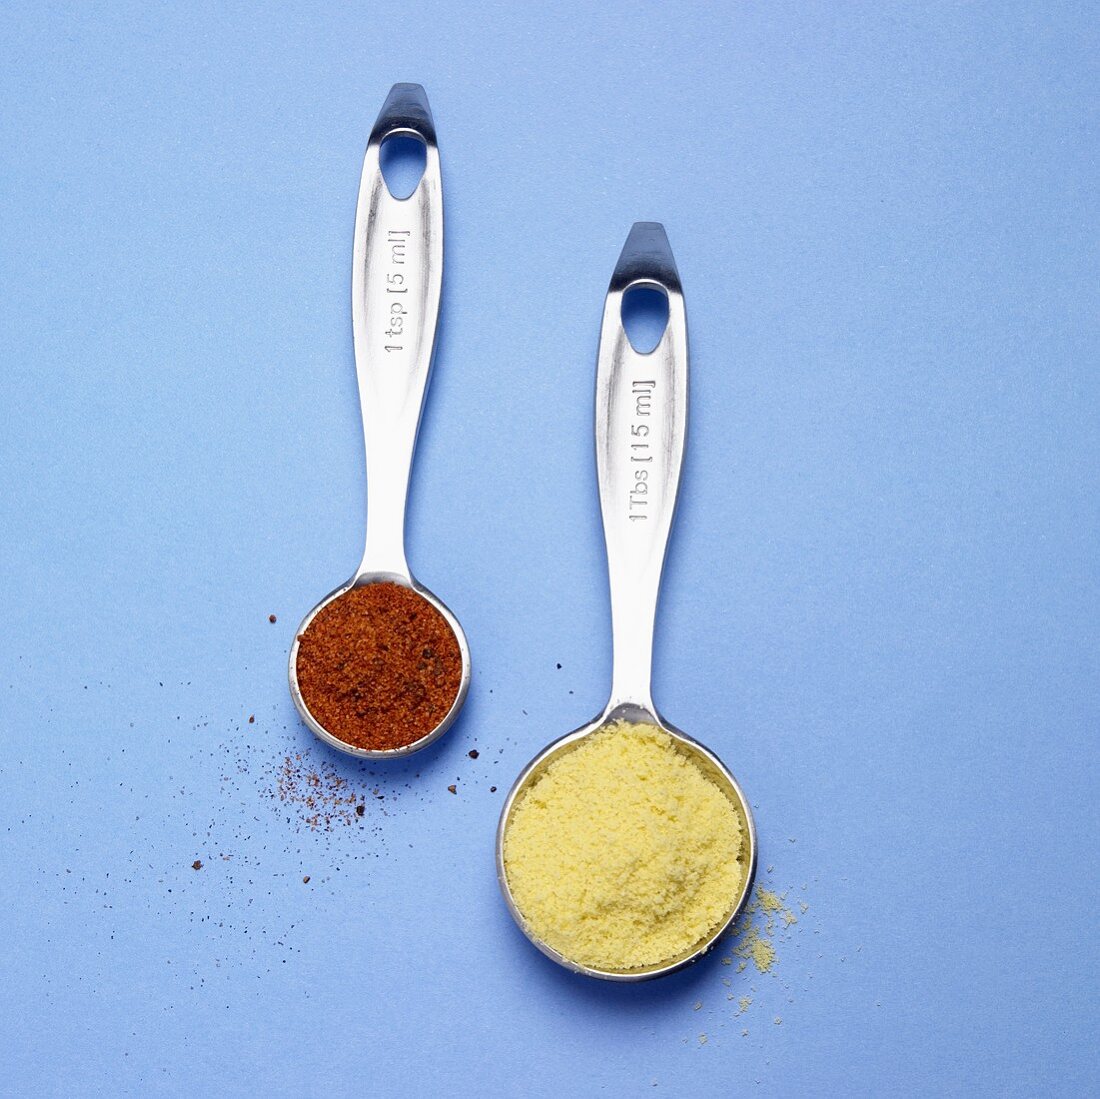 Chicken Bouillon and Chicken Seasoning in Measuring Spoons; Blue Background